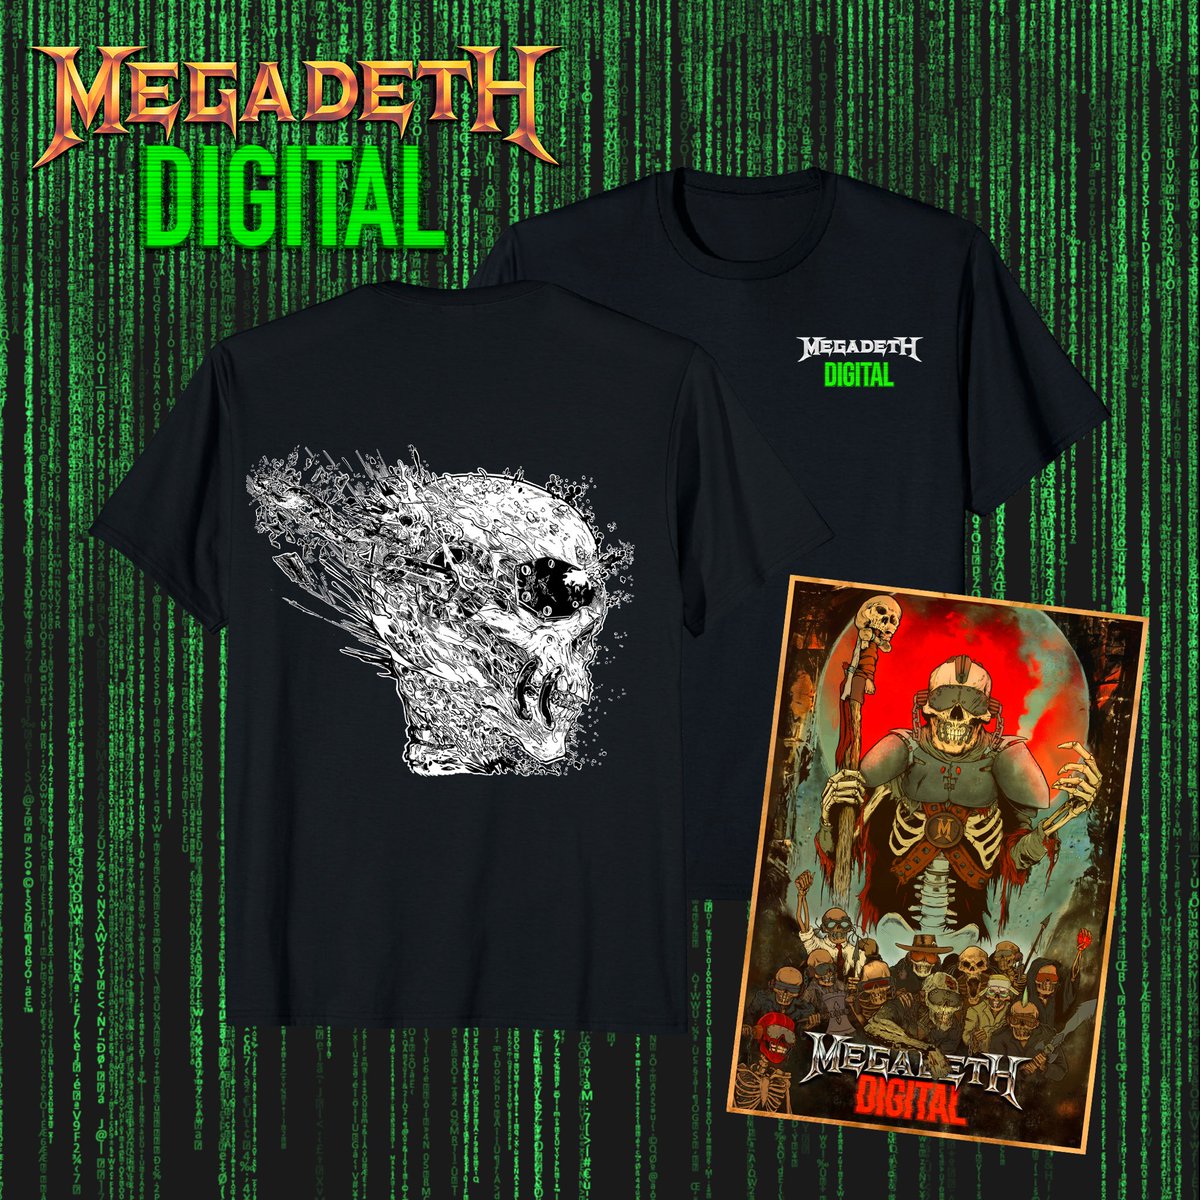 💀EXCLUSIVE MERCHANDISE ITEM💀 Rattleheads here is your first look at the exclusive Megadeth Digital merch item. This brand-new shirt designed by @TheHaddy is exclusive to Rattlehead holders only (one per token) Claim date TBA Note: Poster shown here is another exclusive MDD…